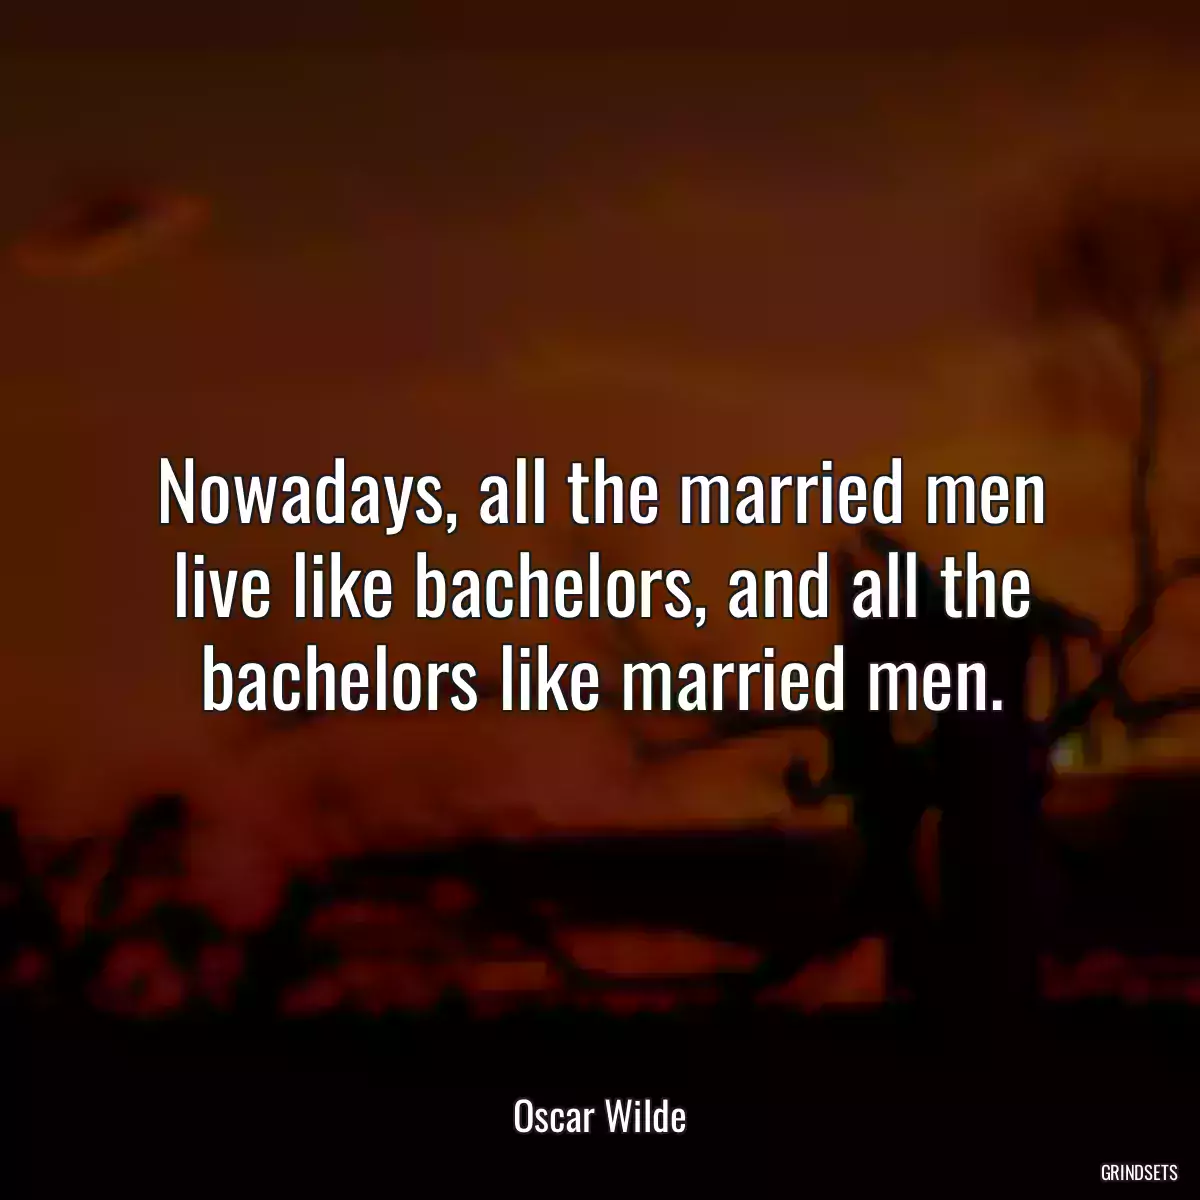 Nowadays, all the married men live like bachelors, and all the bachelors like married men.